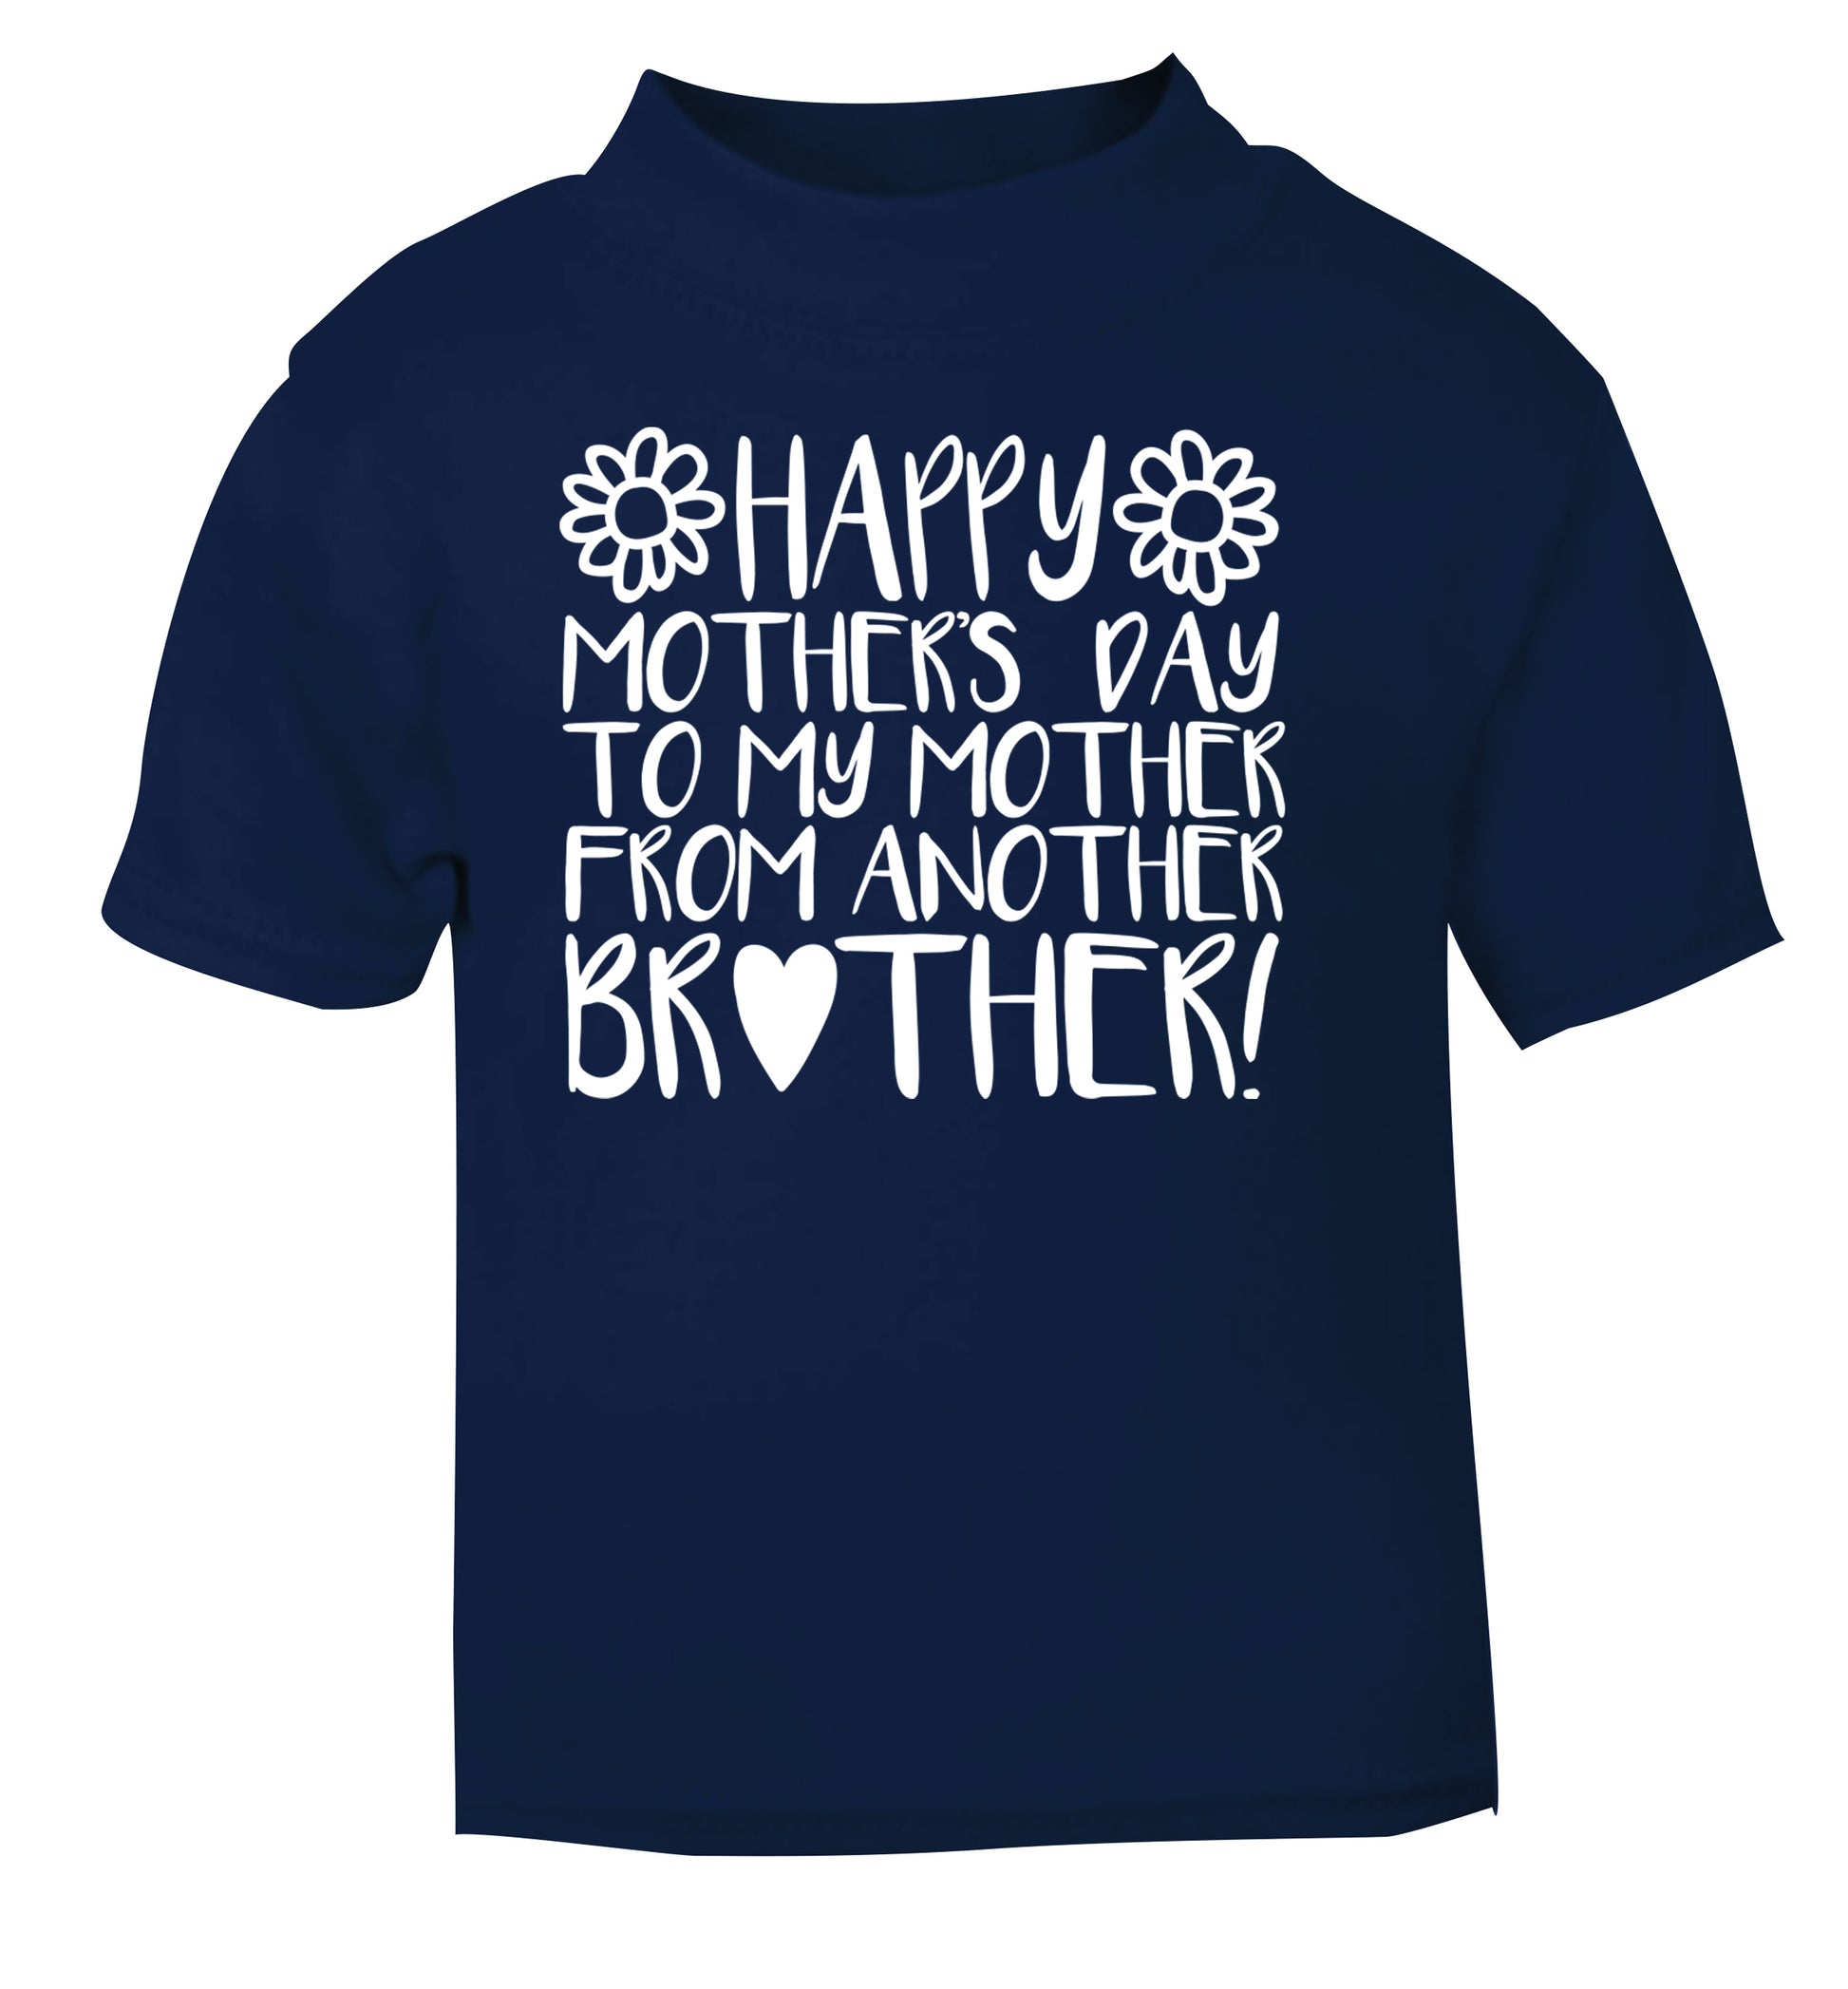 Happy mother's day to my mother from another brother navy Baby Toddler Tshirt 2 Years